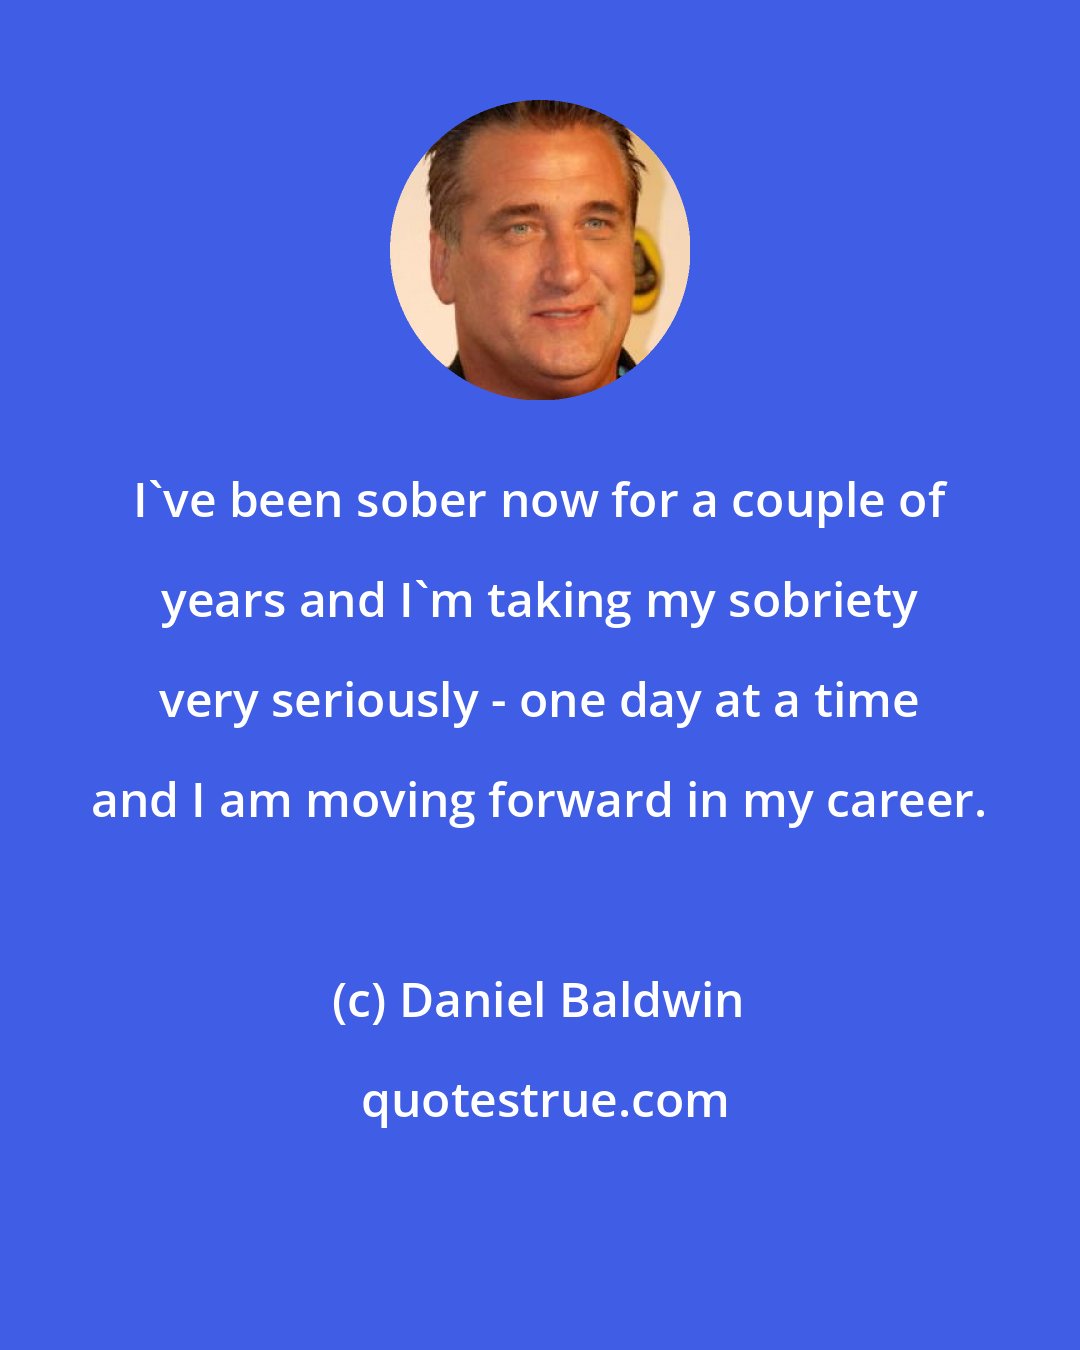 Daniel Baldwin: I've been sober now for a couple of years and I'm taking my sobriety very seriously - one day at a time and I am moving forward in my career.